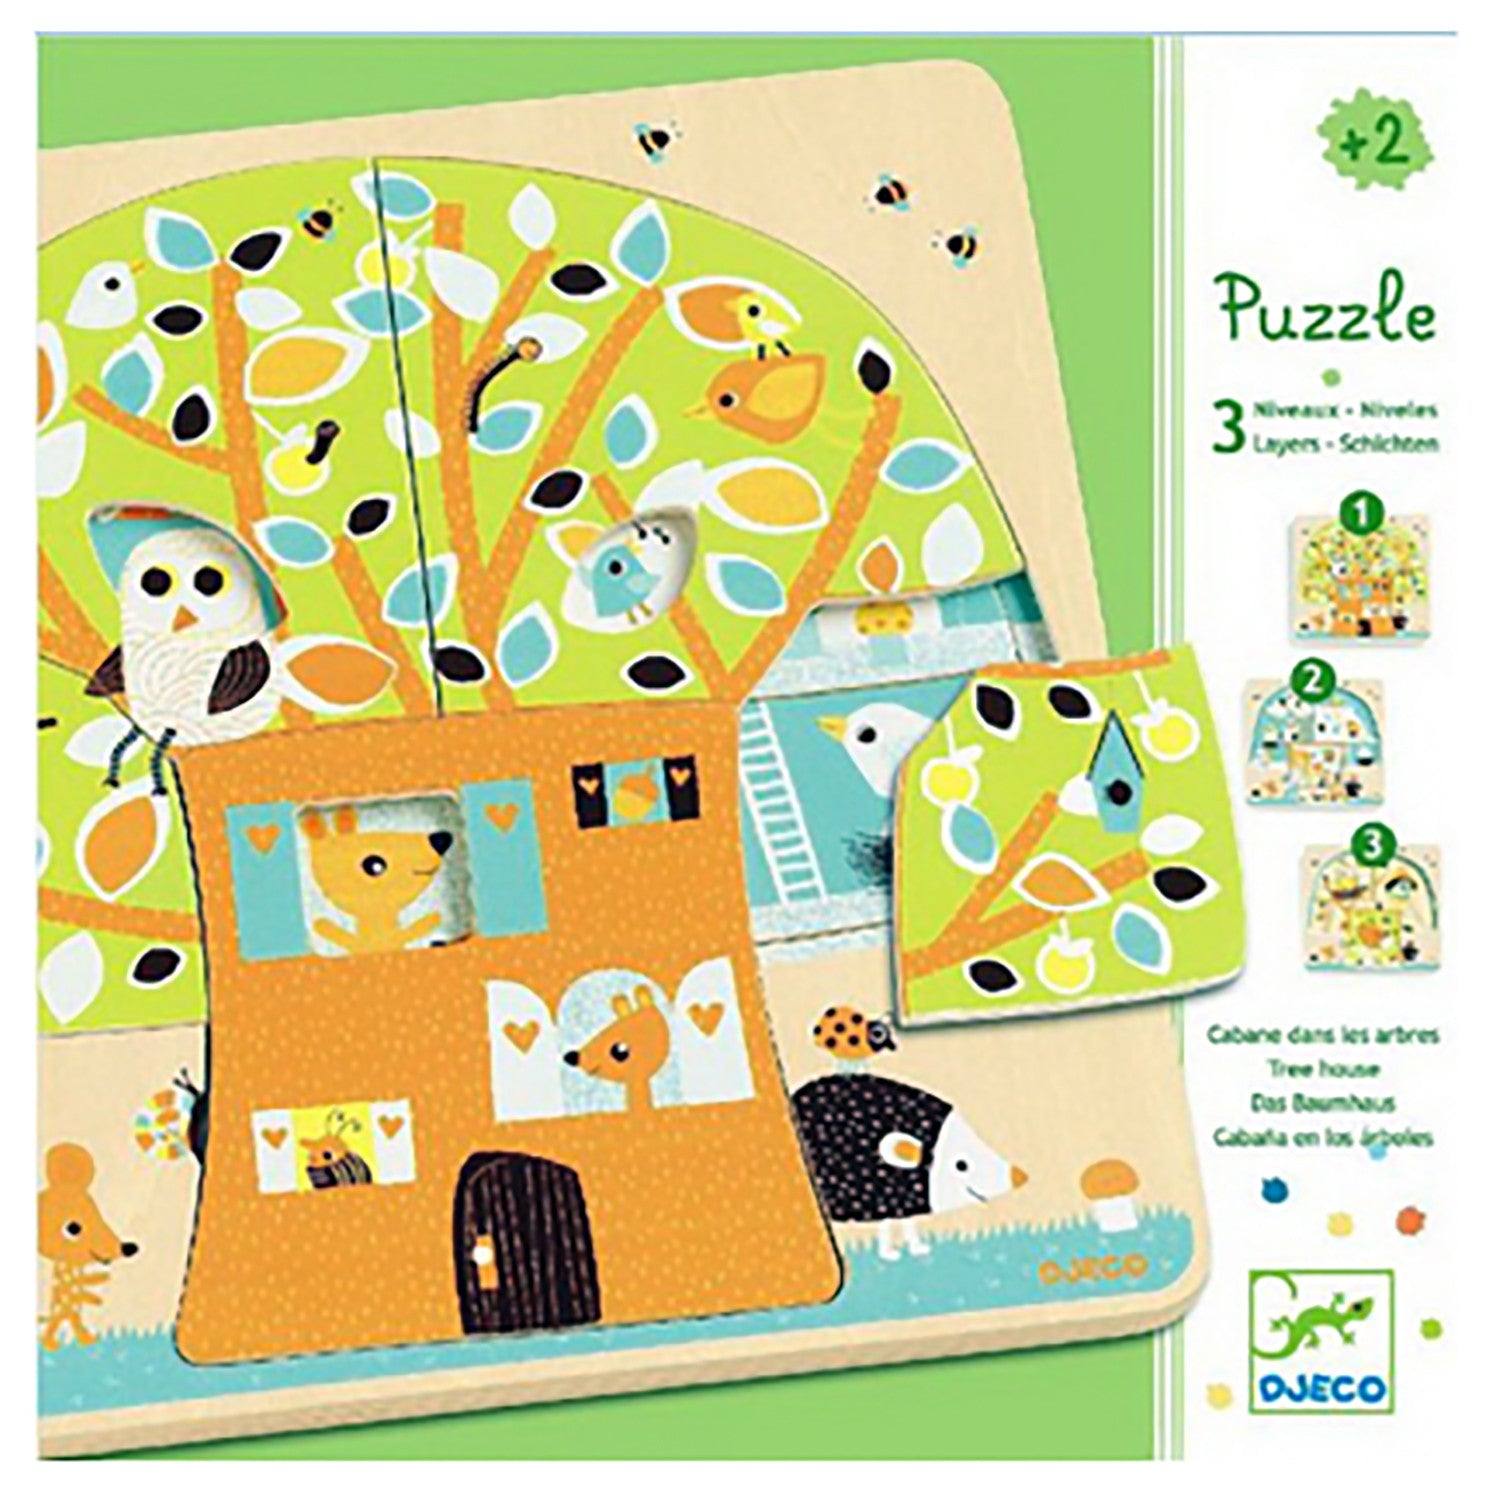 Djeco Puzzle 3 Layer Wooden Puzzle Treehouse